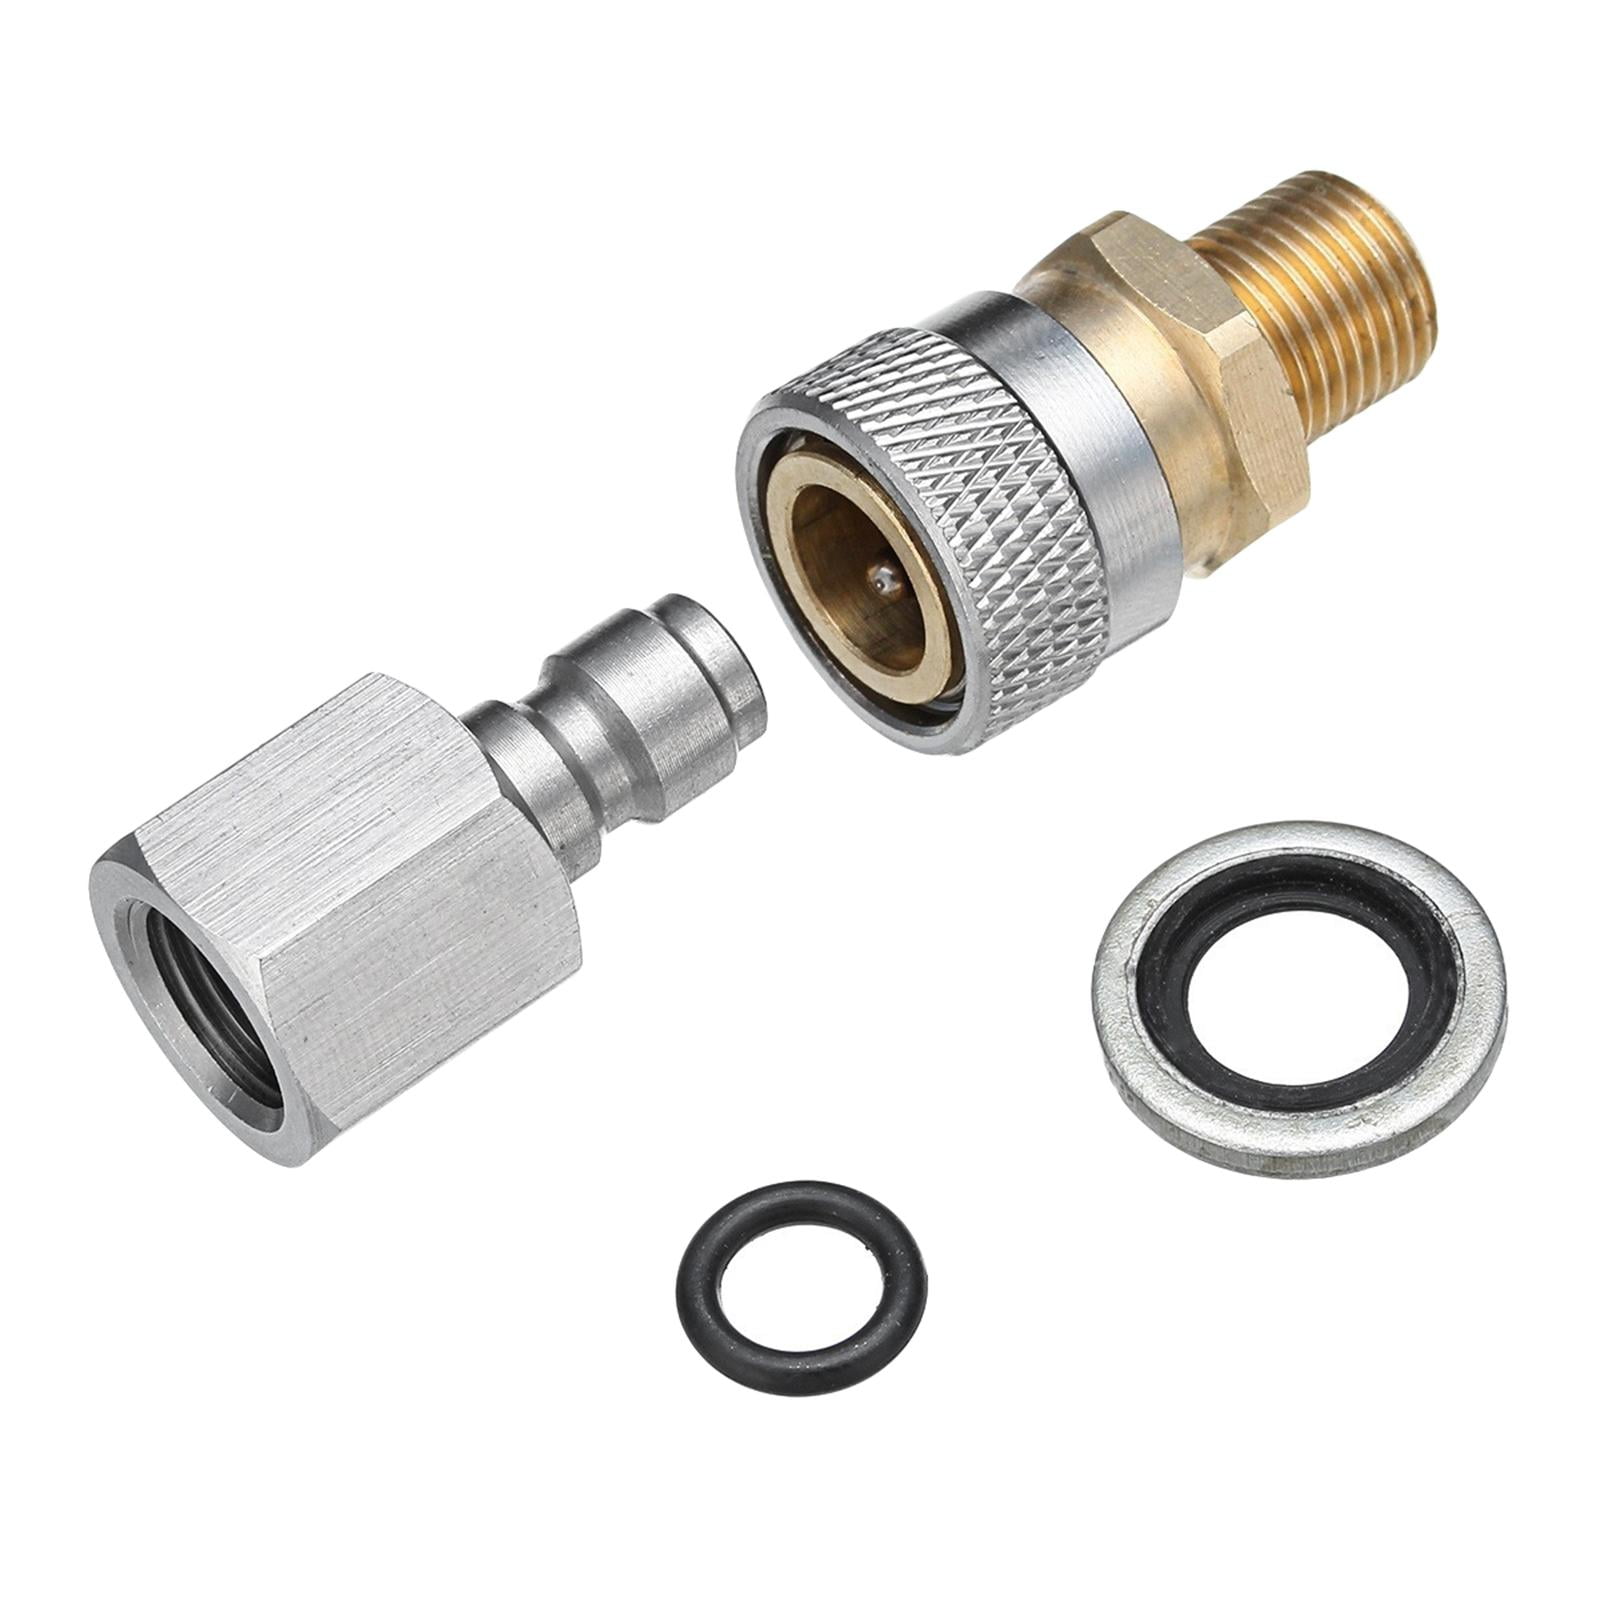 New Stainless steel Inner Thread 1/8" NPT Male Quick Disconnect Adaptor 